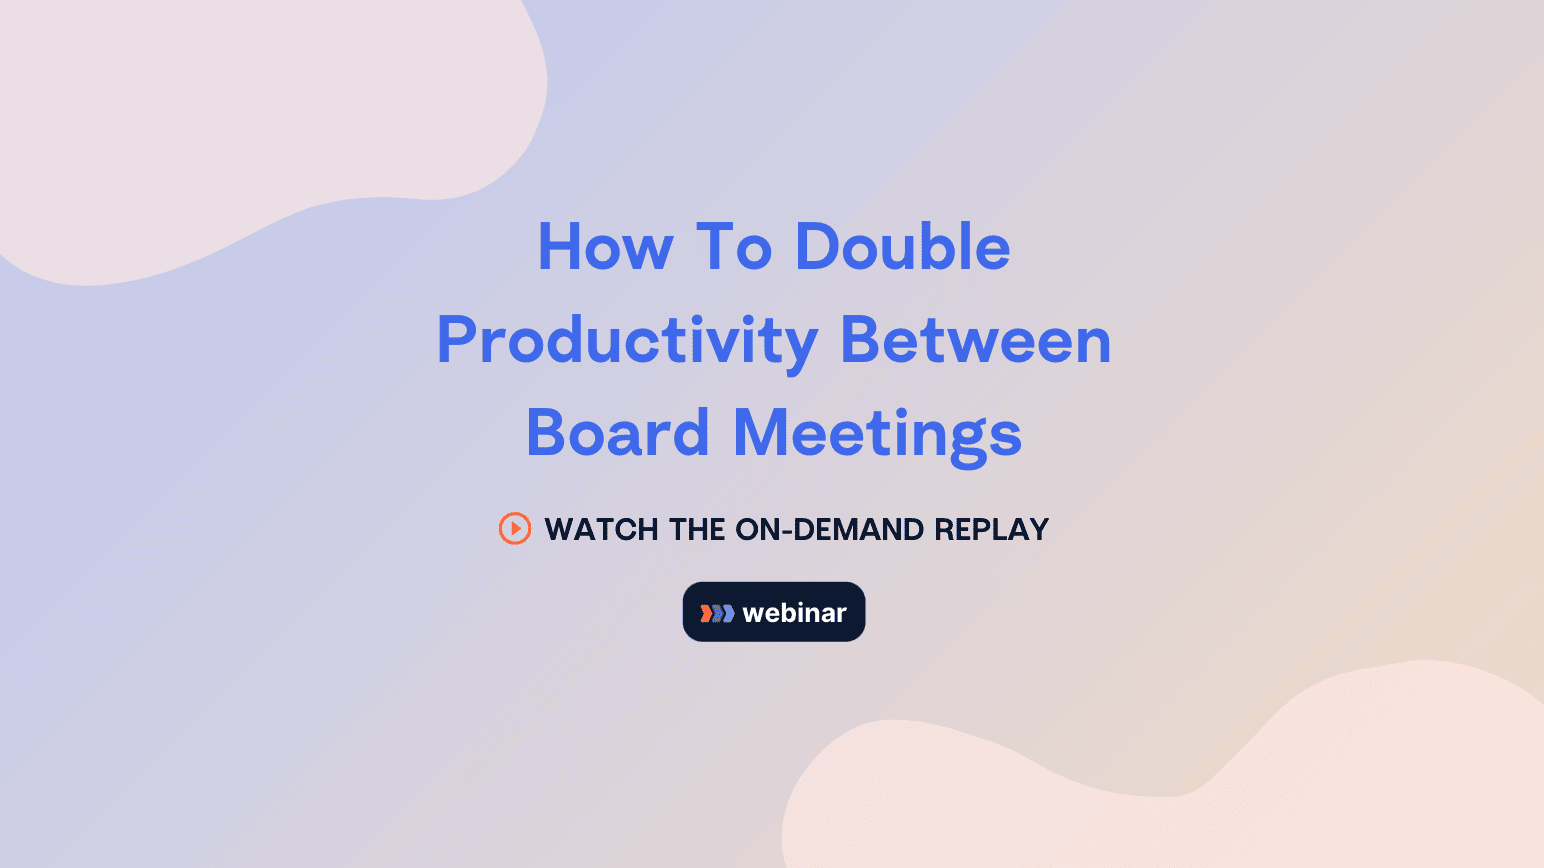 How to Double Productivity Between Board Meetings